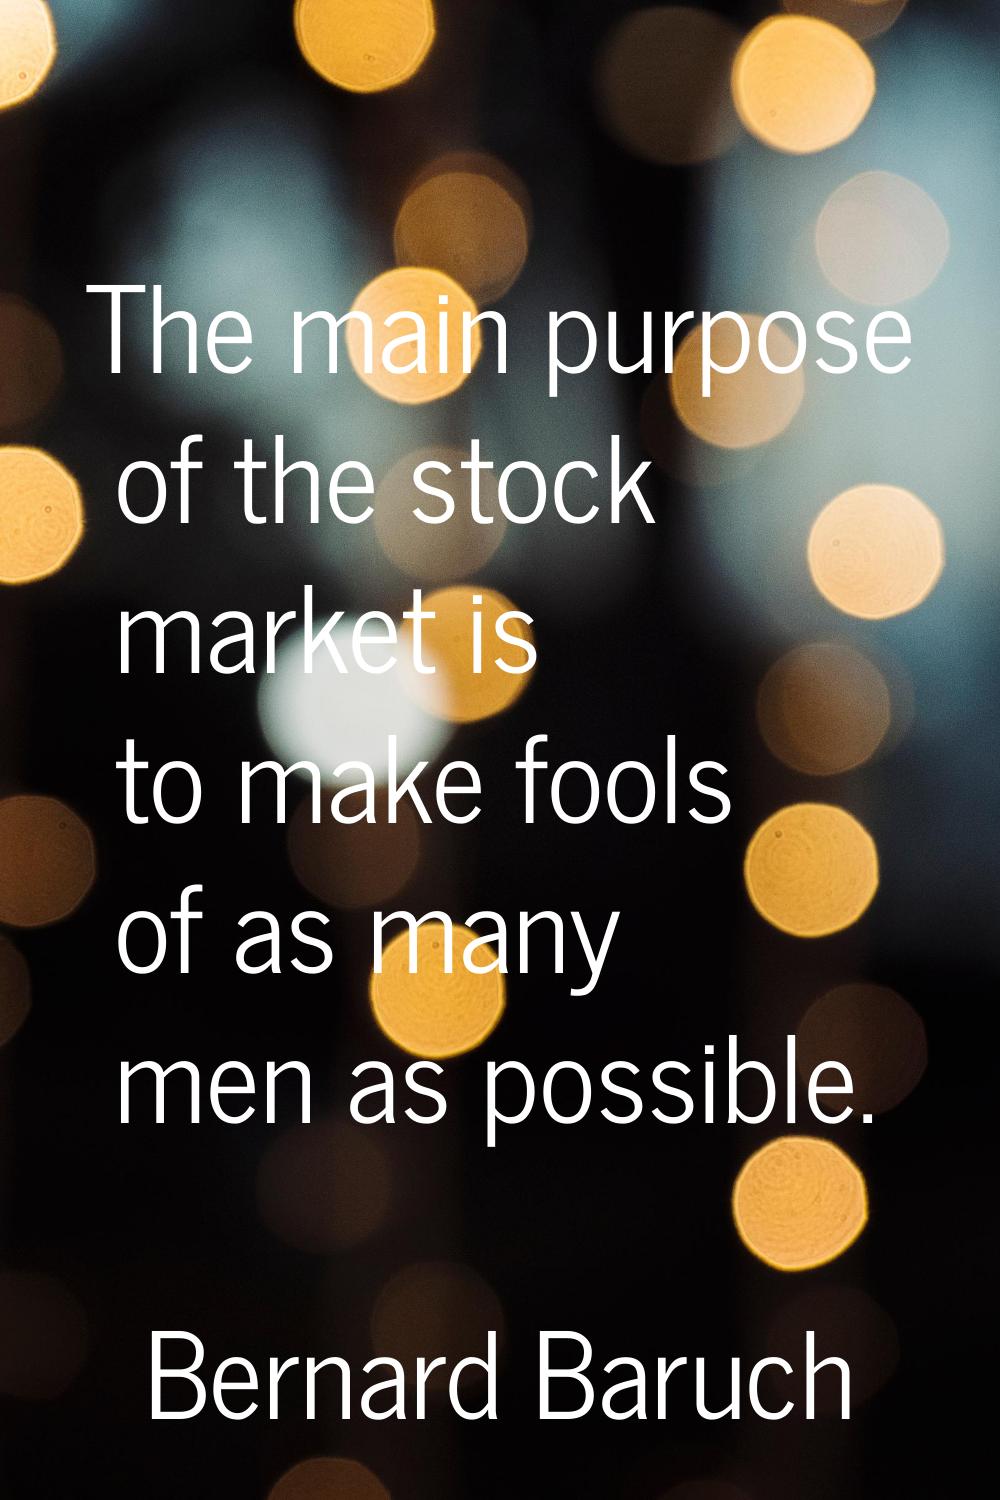 The main purpose of the stock market is to make fools of as many men as possible.